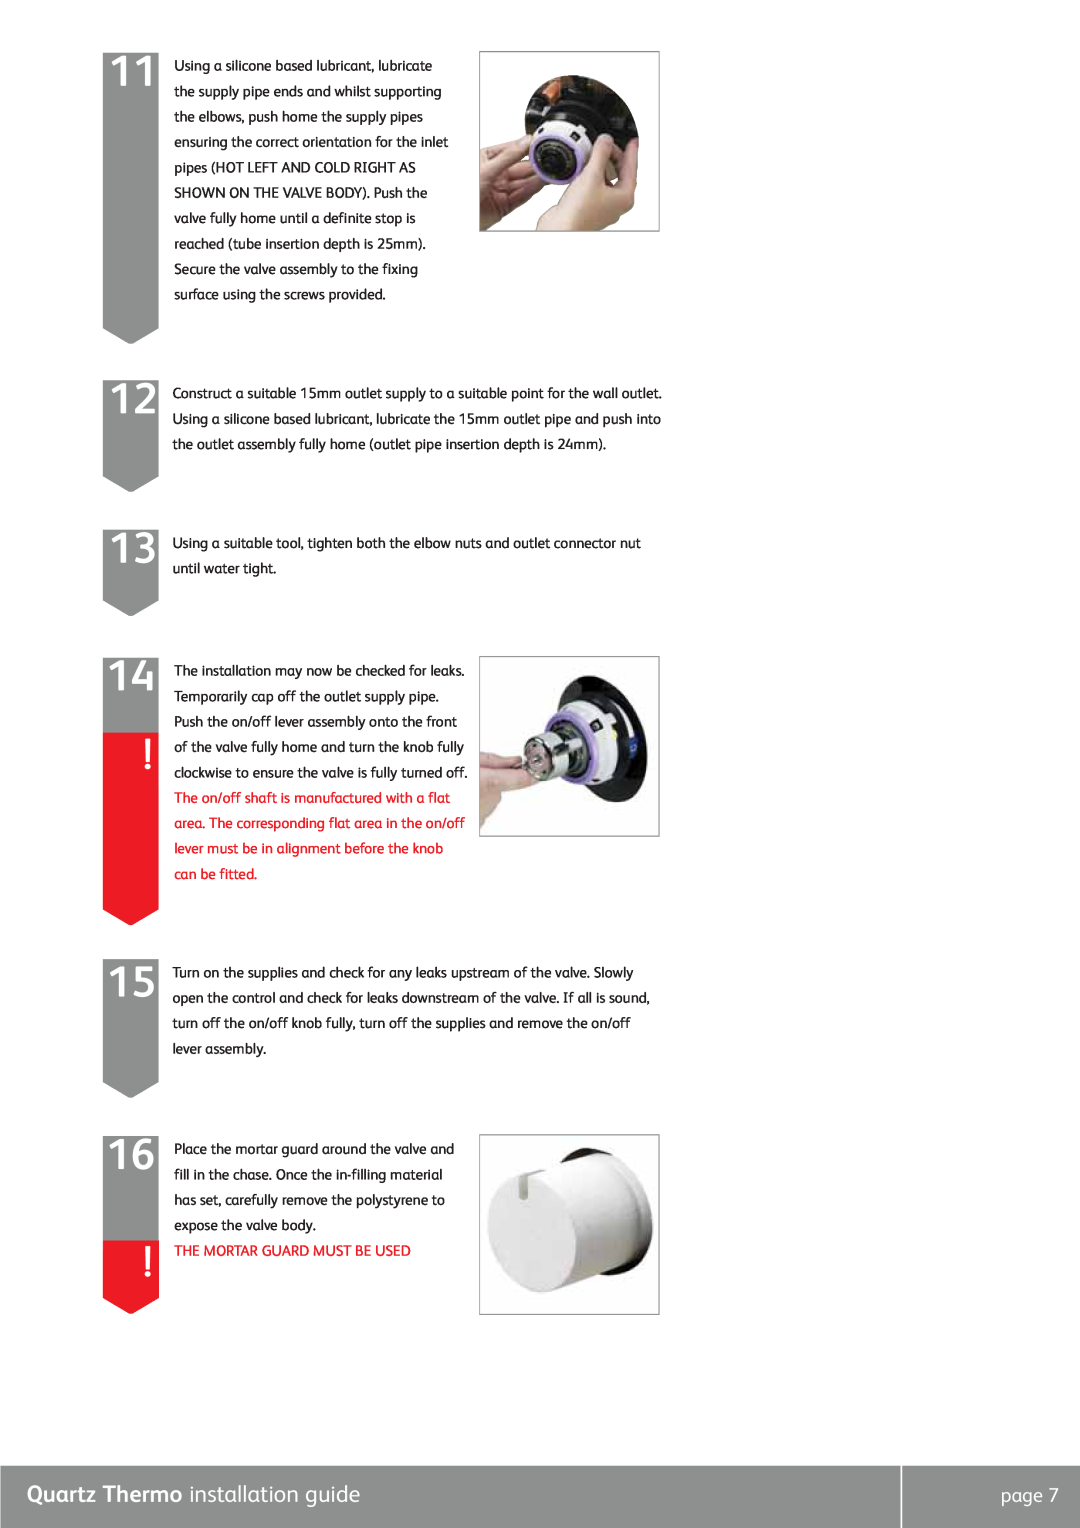 Quartz QZ3111 Quartz Thermo installation guide, Temporarily cap off the outlet supply pipe, The Mortar Guard Must Be Used 